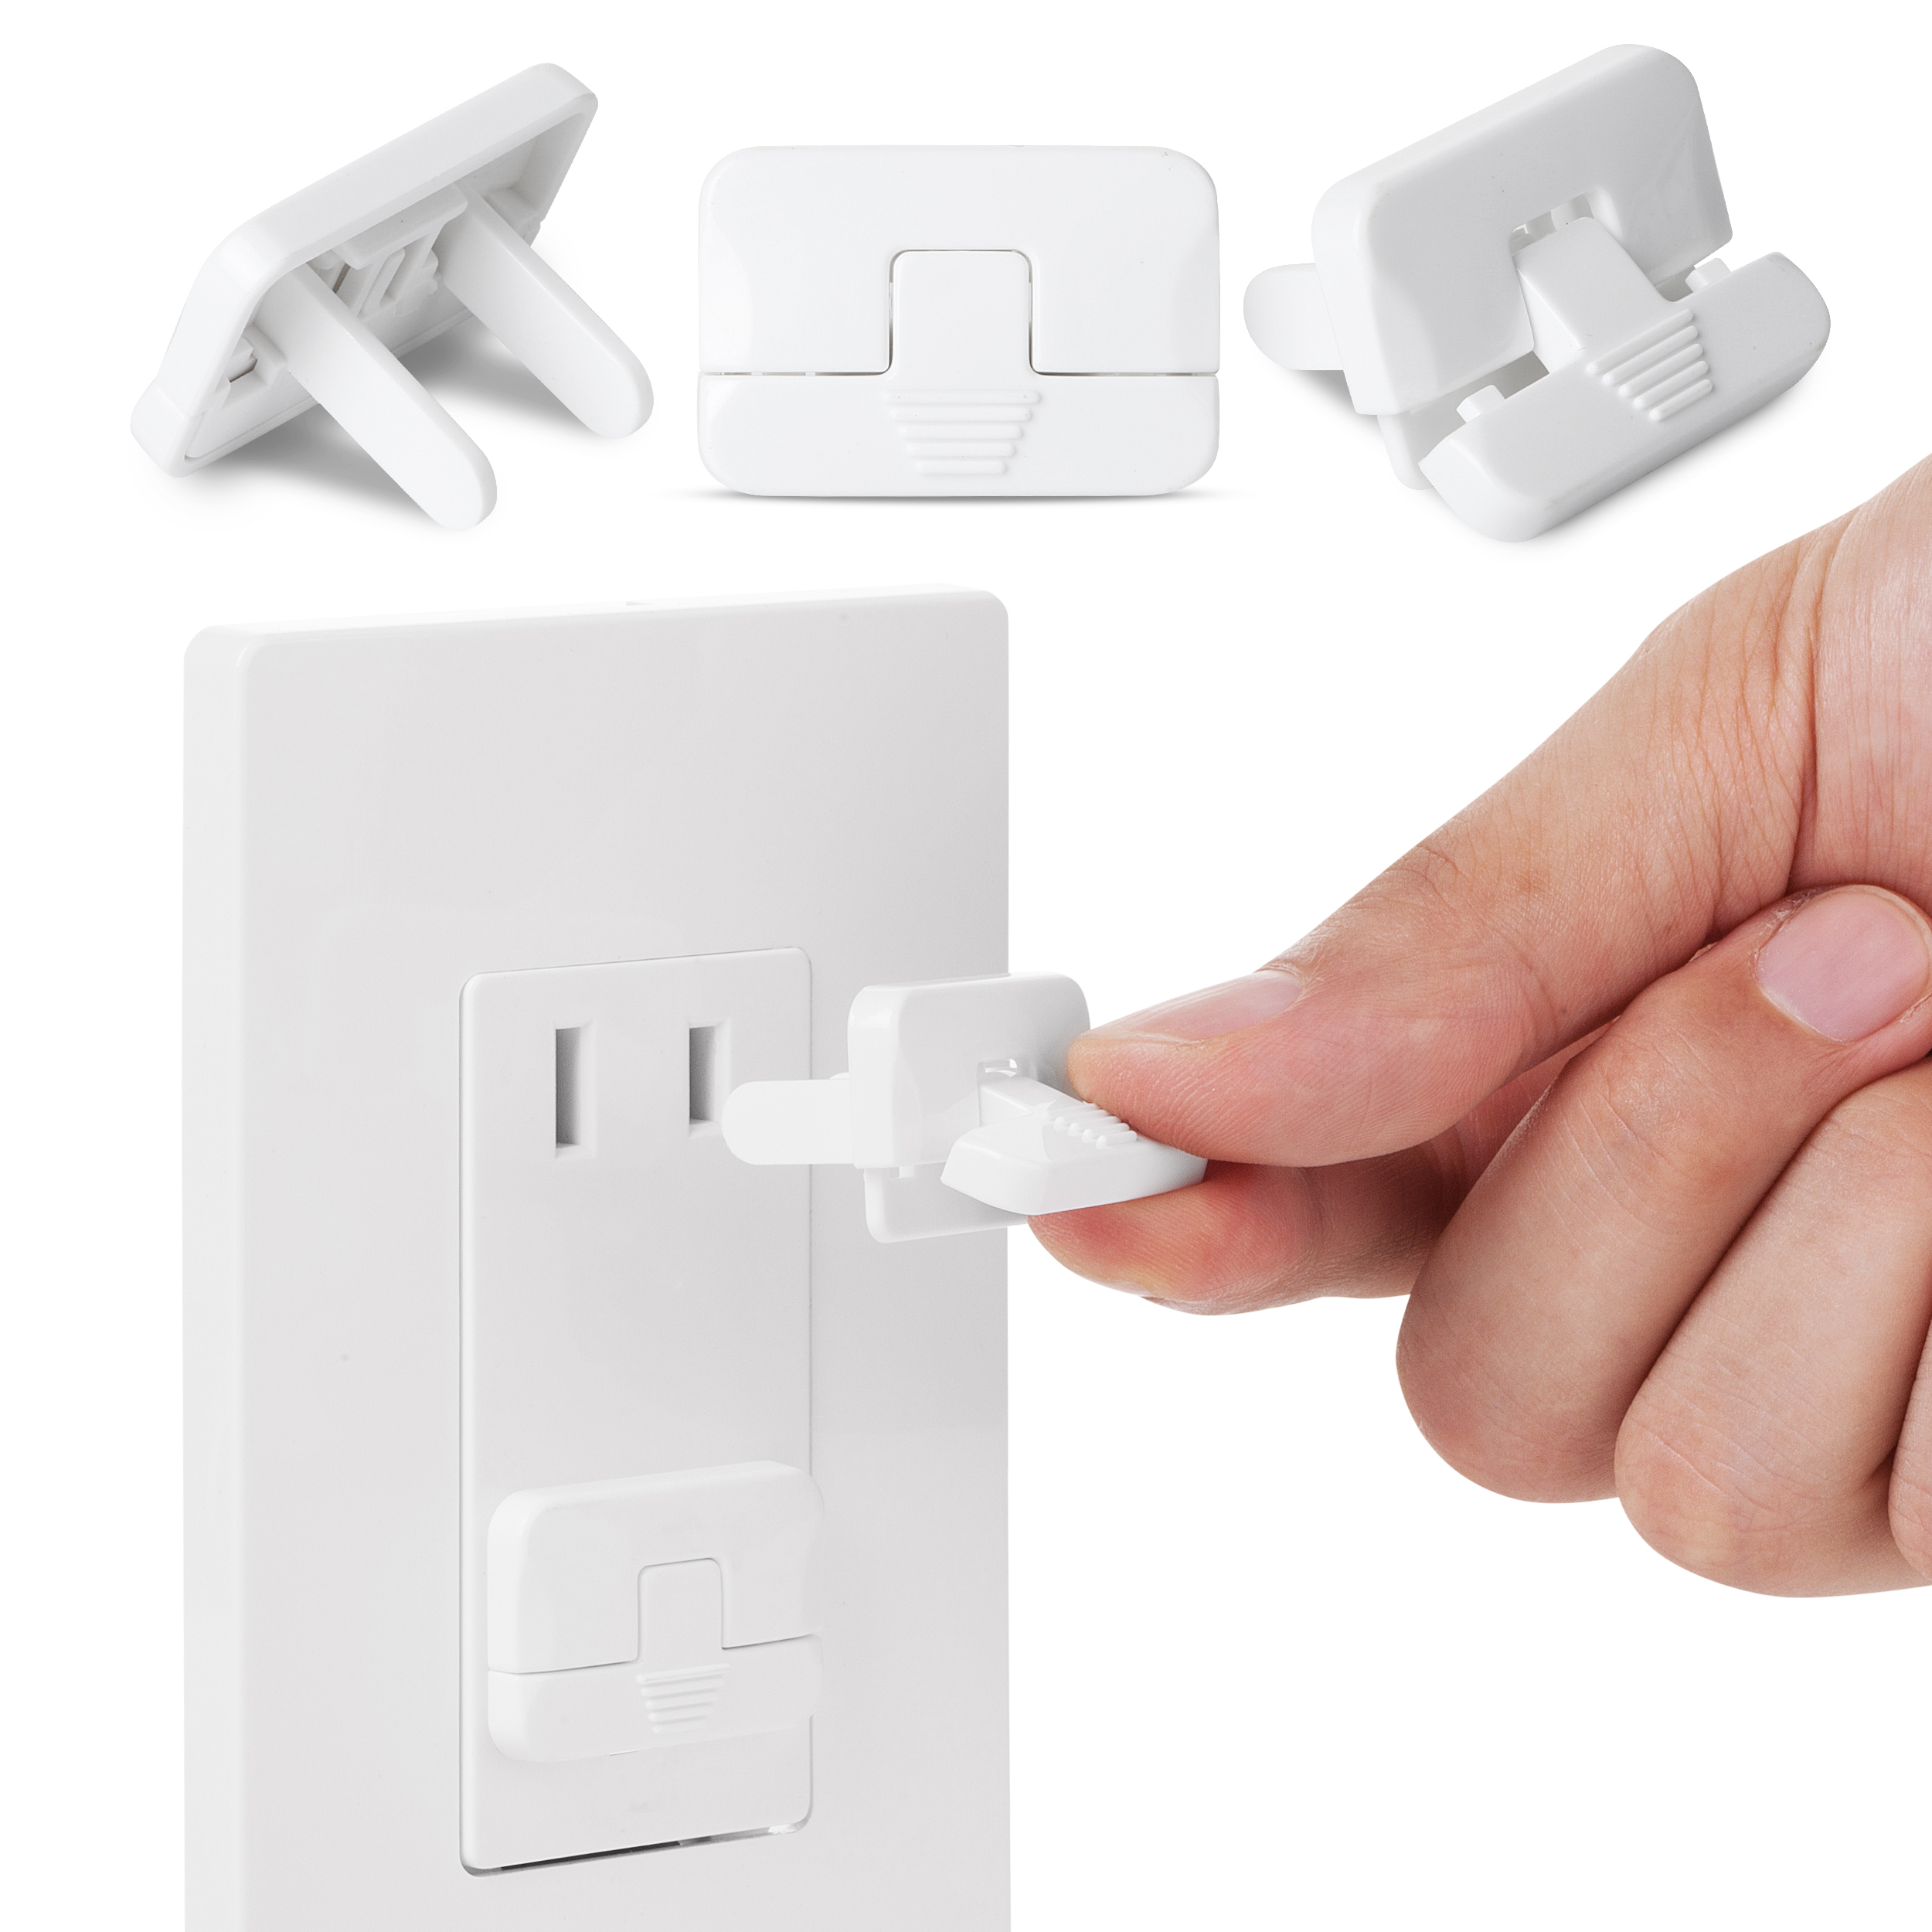 20PCS Safety Child Baby Proof Electric Outlet Socket Plastic Cover new US 